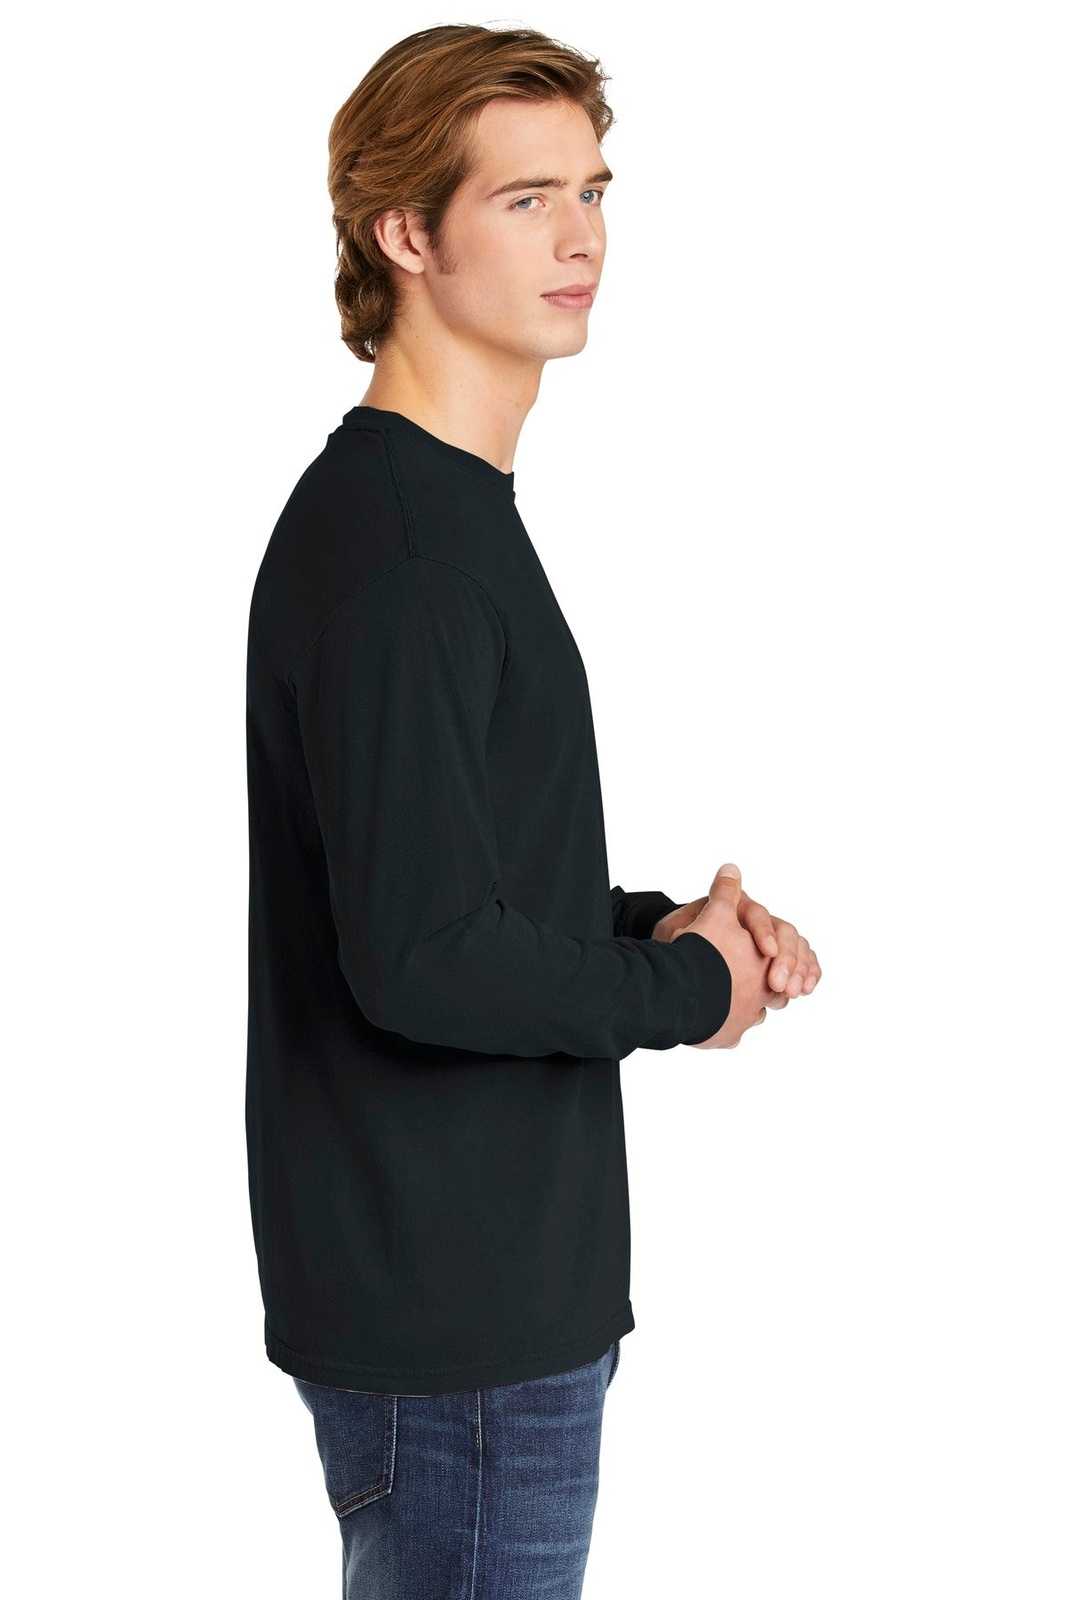 Comfort Colors 6014 Heavyweight Ring Spun Long Sleeve Tee - Black - HIT a Double